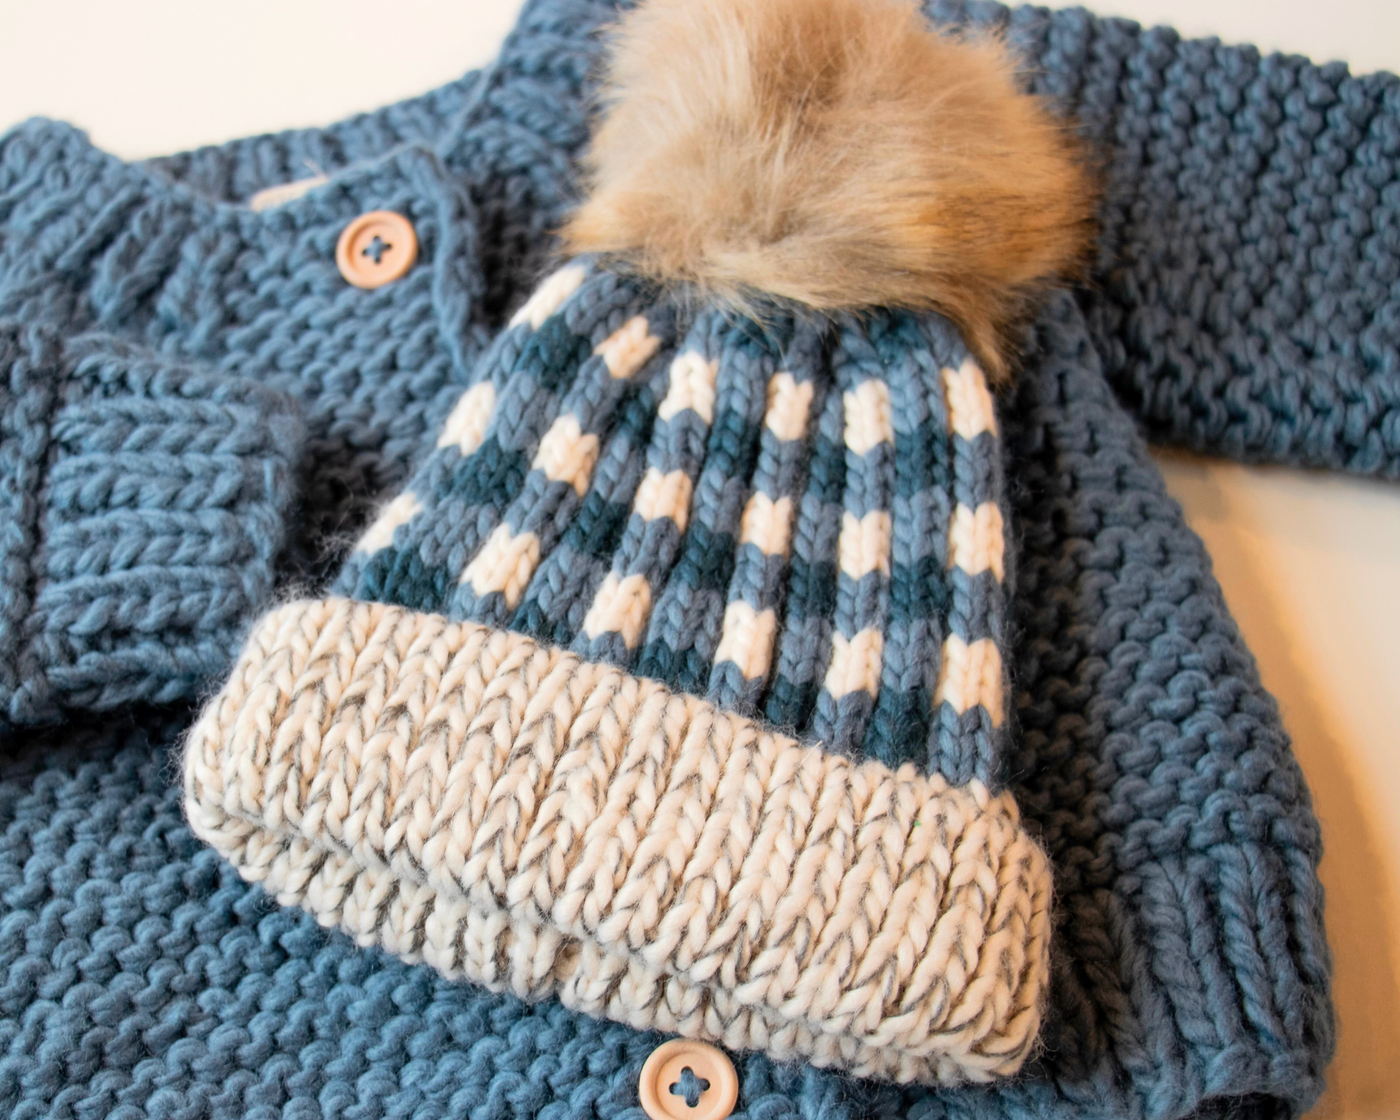 Blue and white checkerded beanie with a beige puff ball on top on a blue knit sweater from Huggalugs